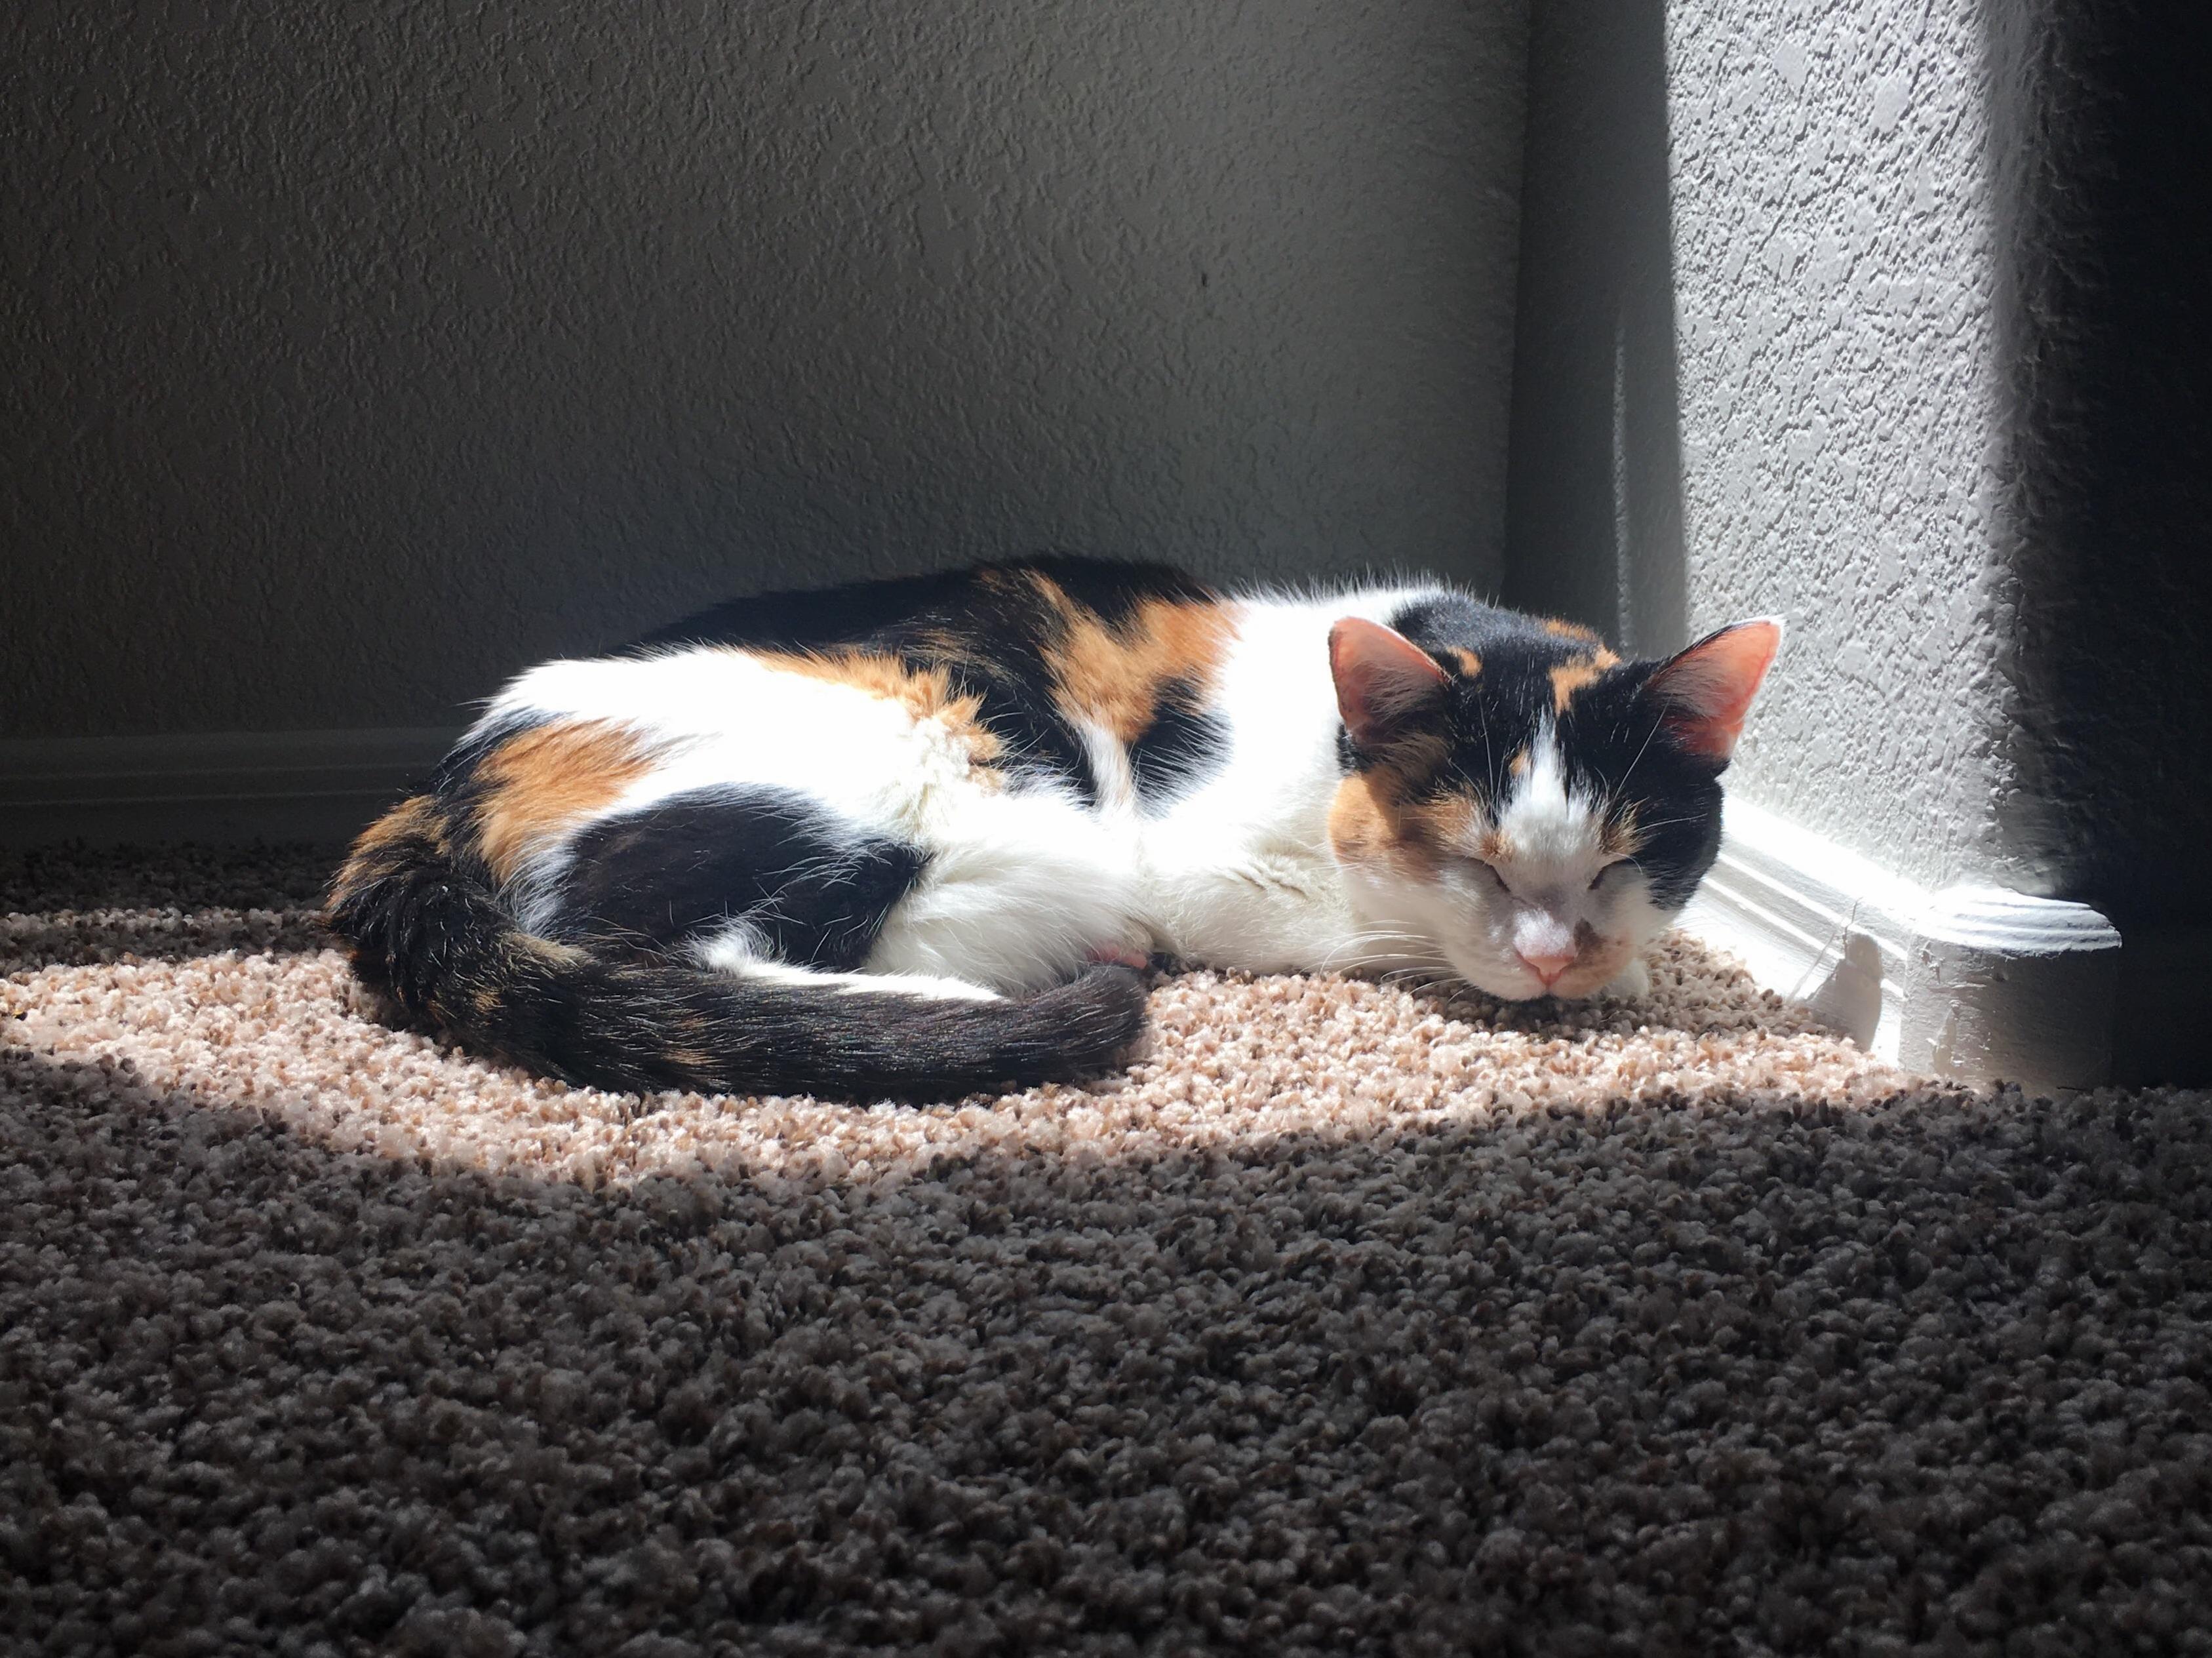 Our sweet baby waffles is enjoying her time in the sun.